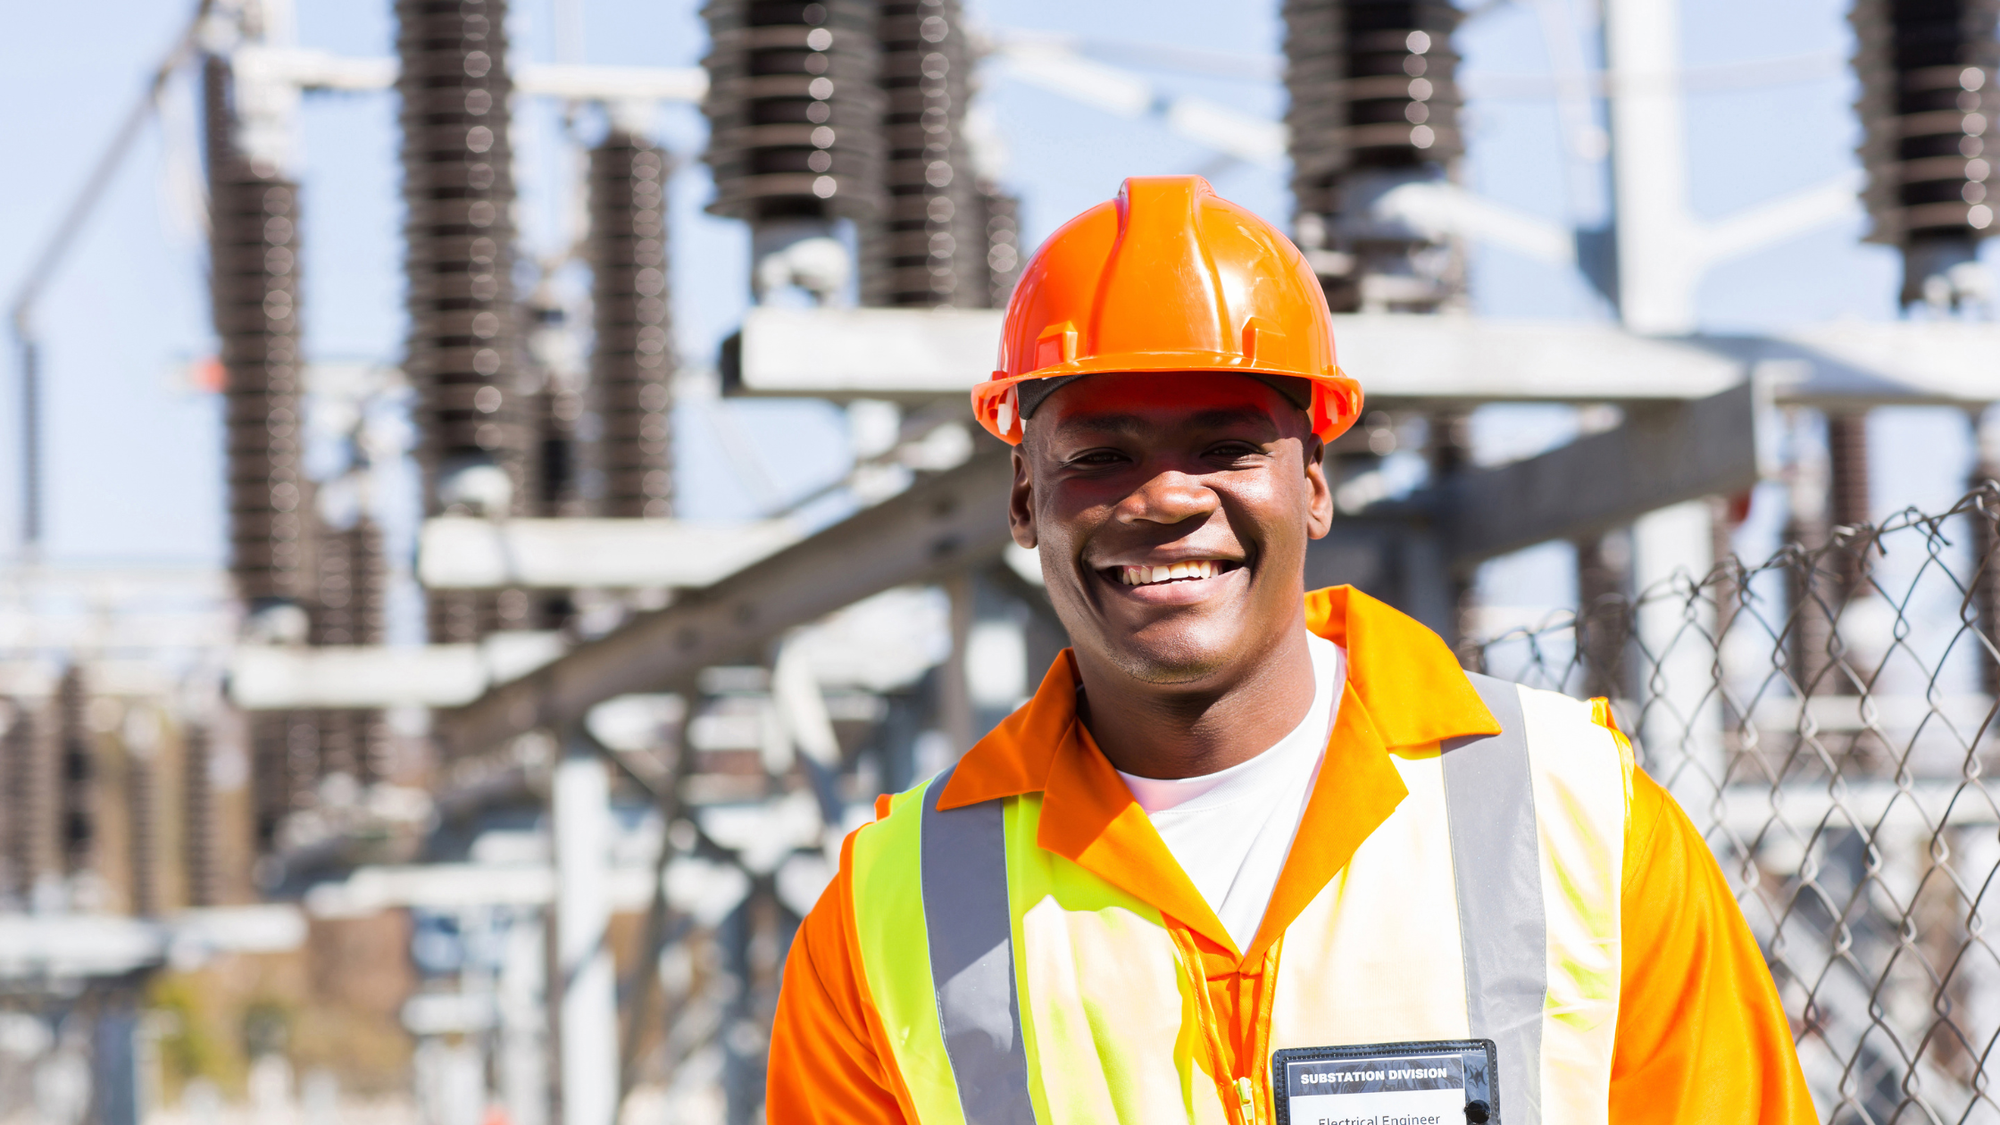 Electrical Engineer In Front Of Pylons Smiling As Has A New Enterprise Tablet